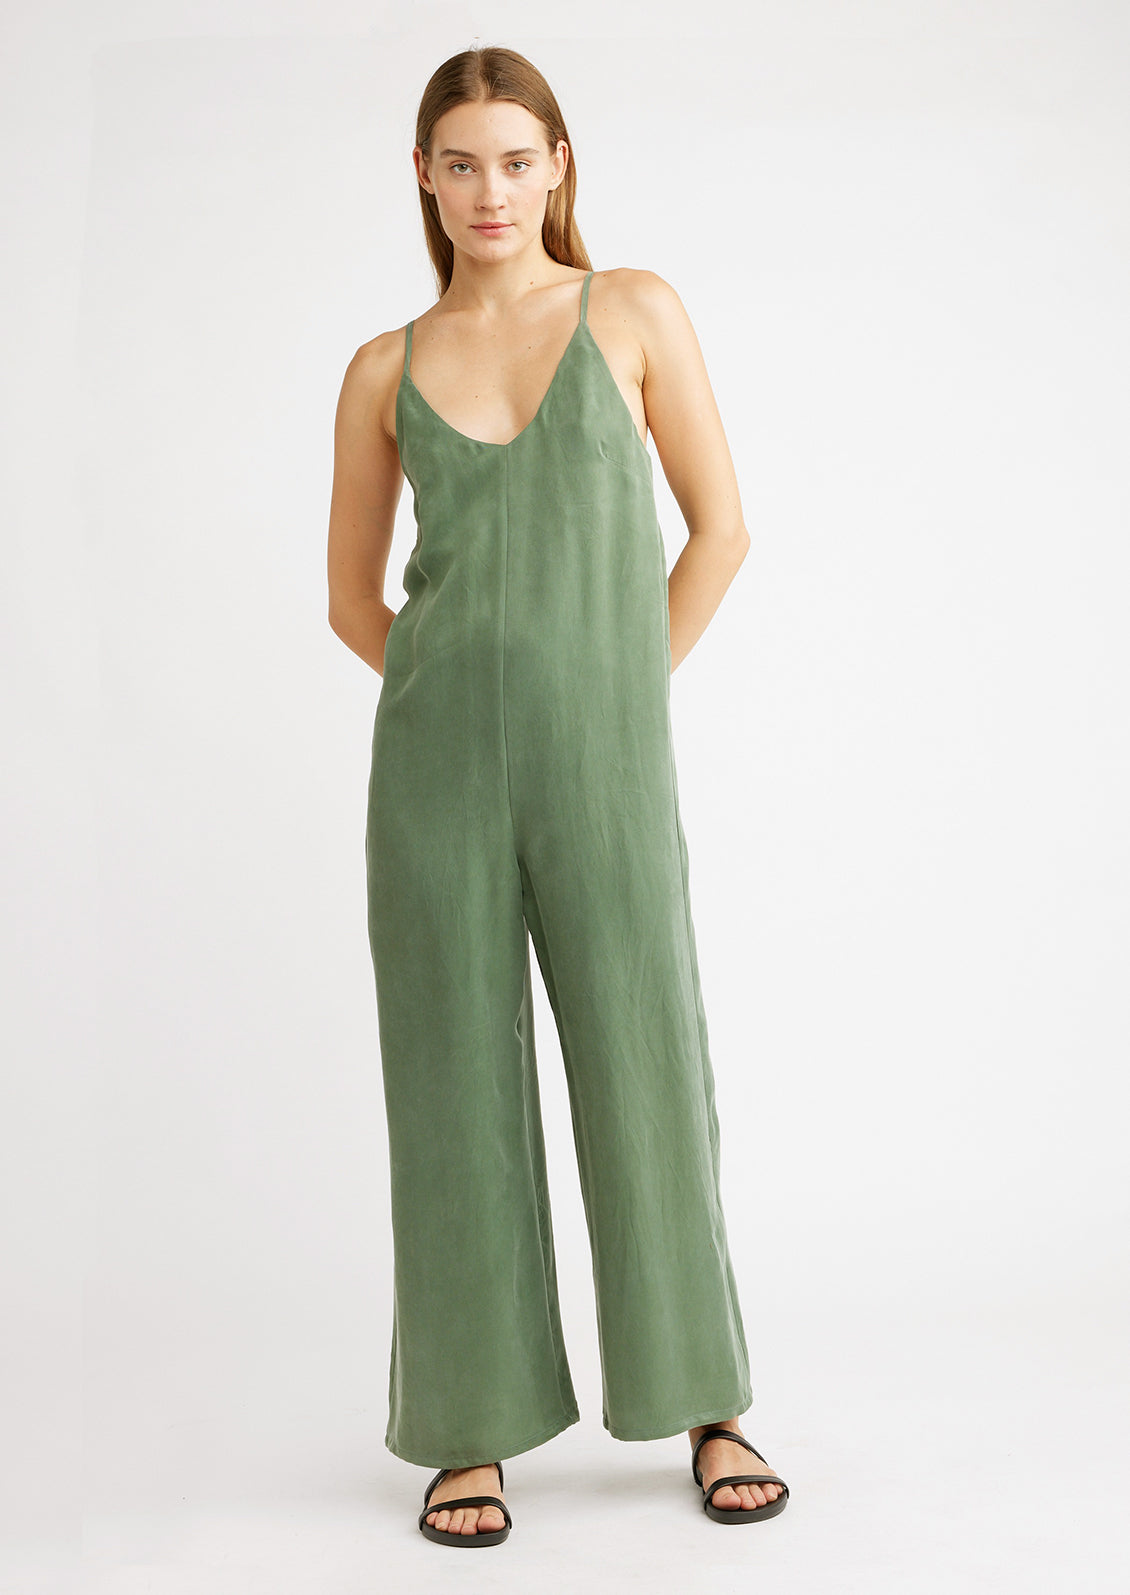 A woman wearing a green jumpsuit with black sandals